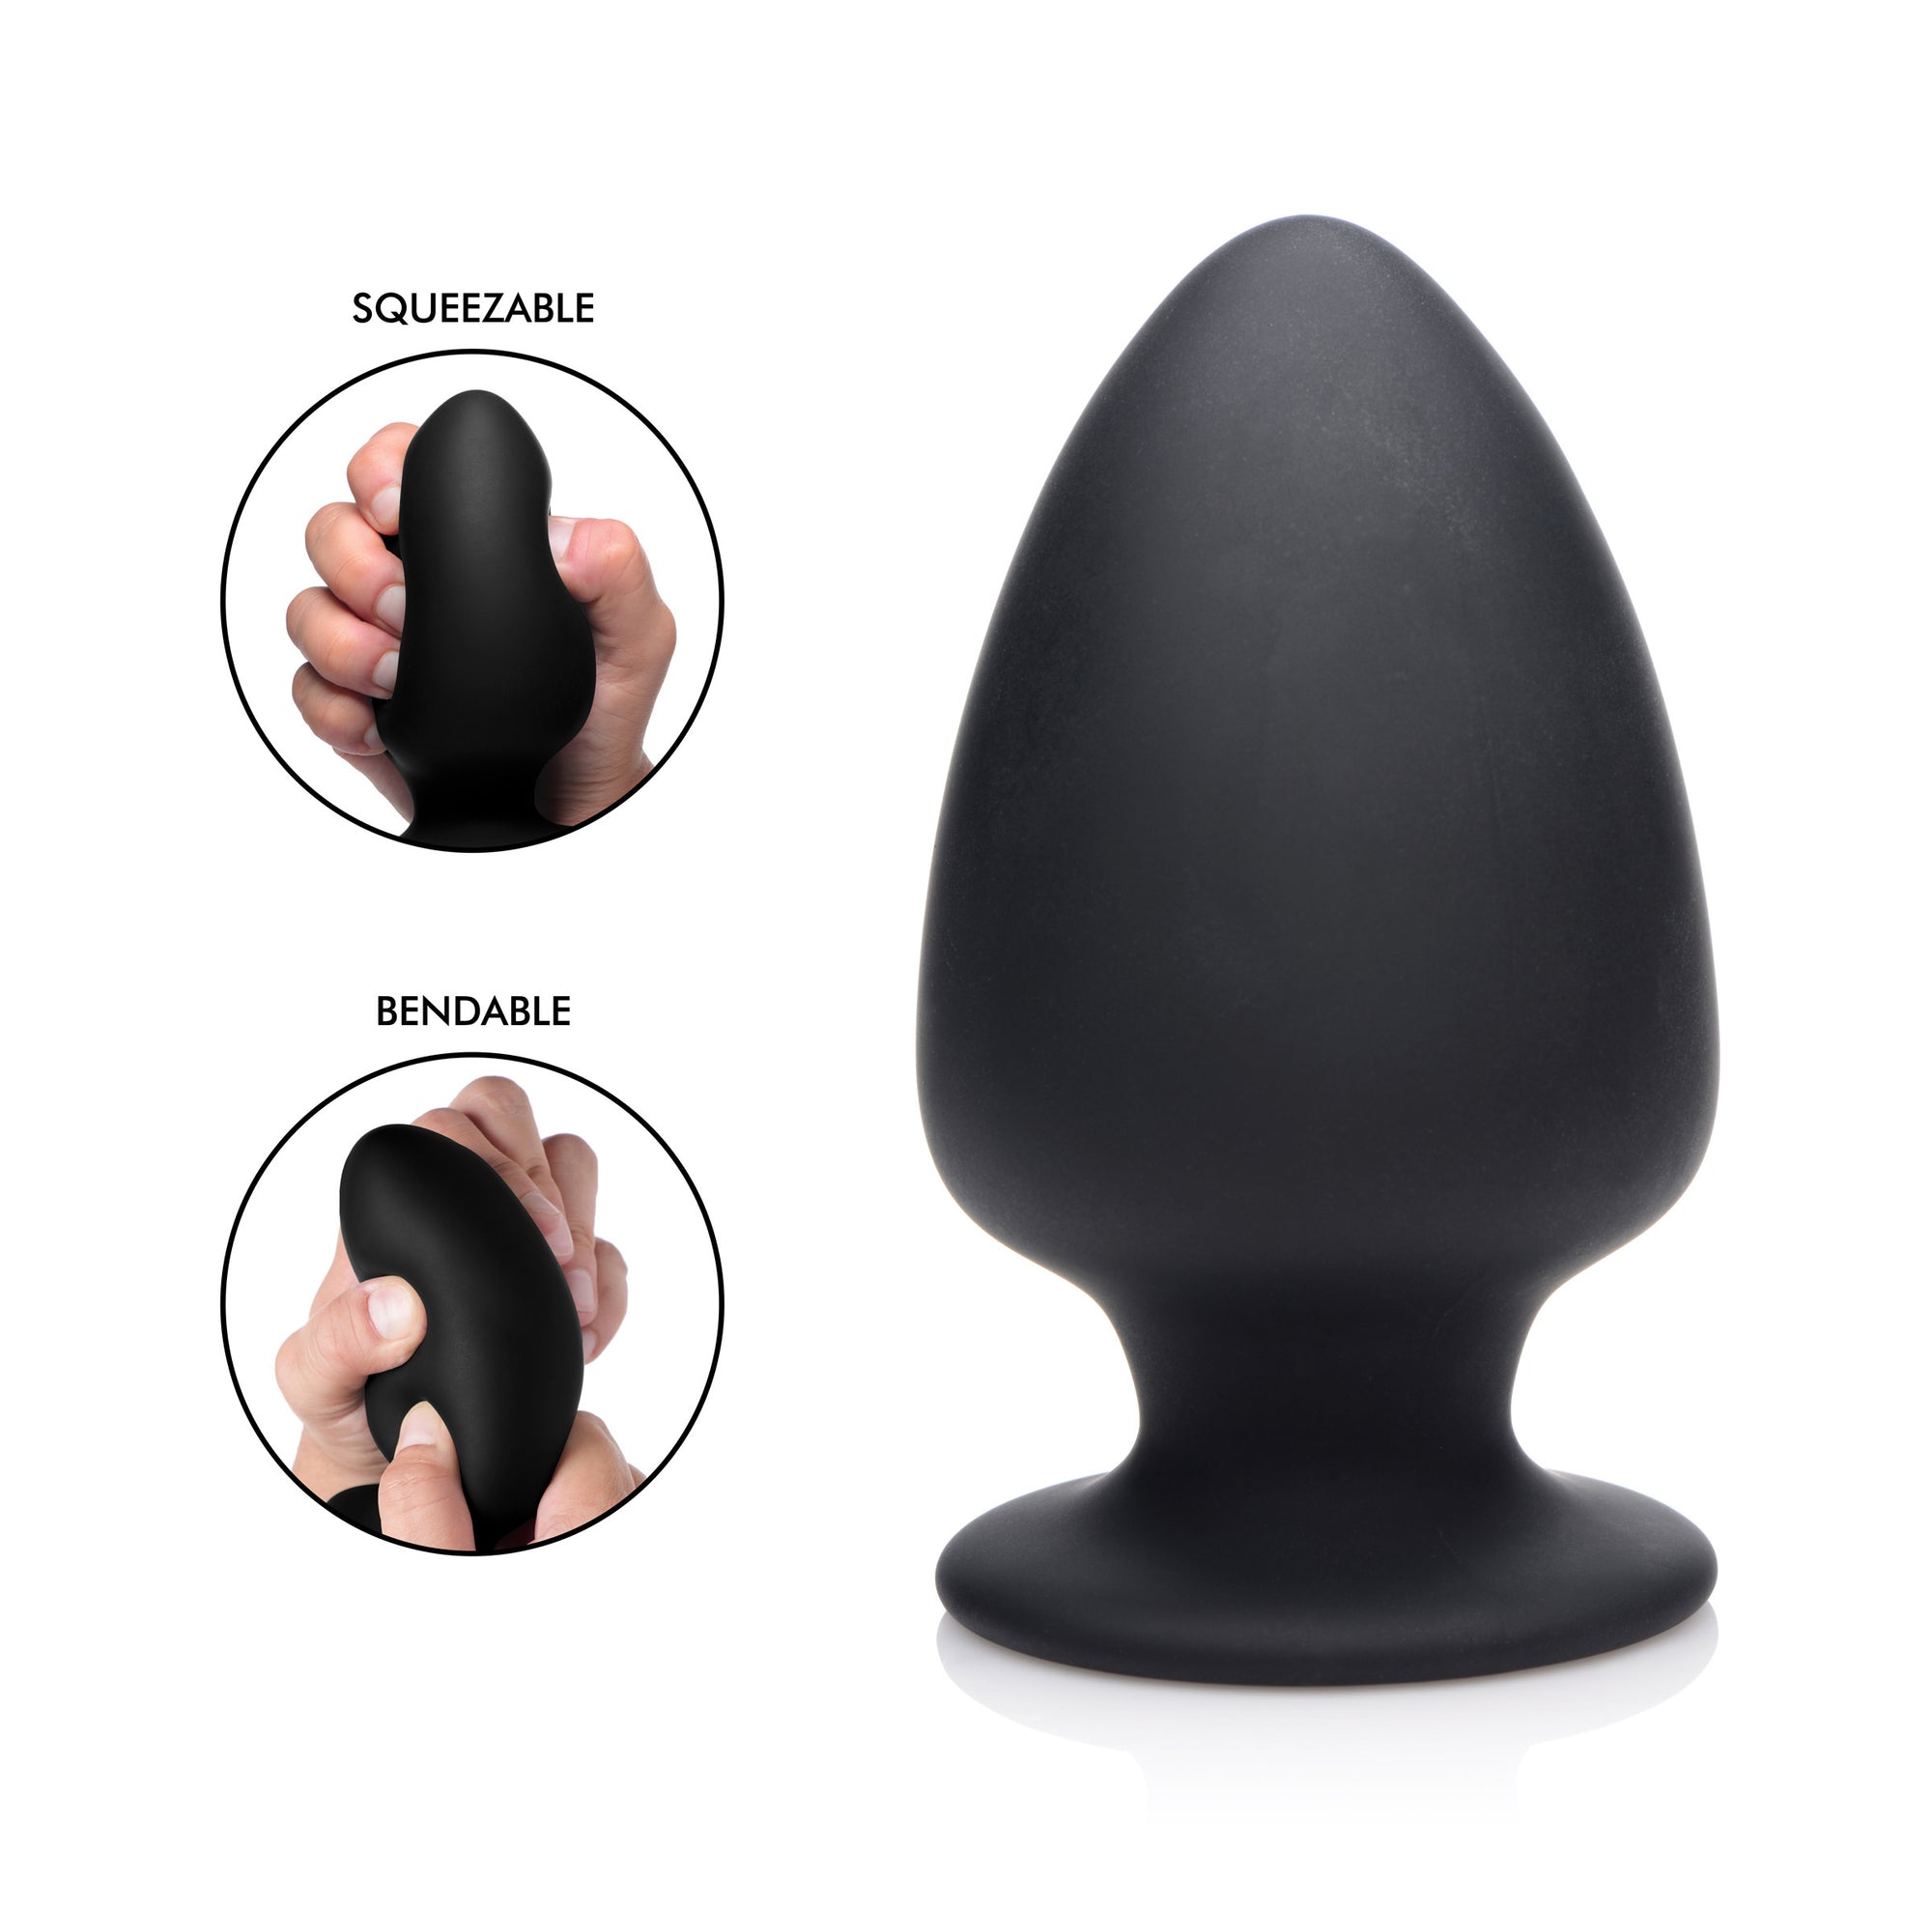 Squeezable Silicone Anal Plug - Large 
Anal Toys
Squeeze-It Cupid’s Secret Stash